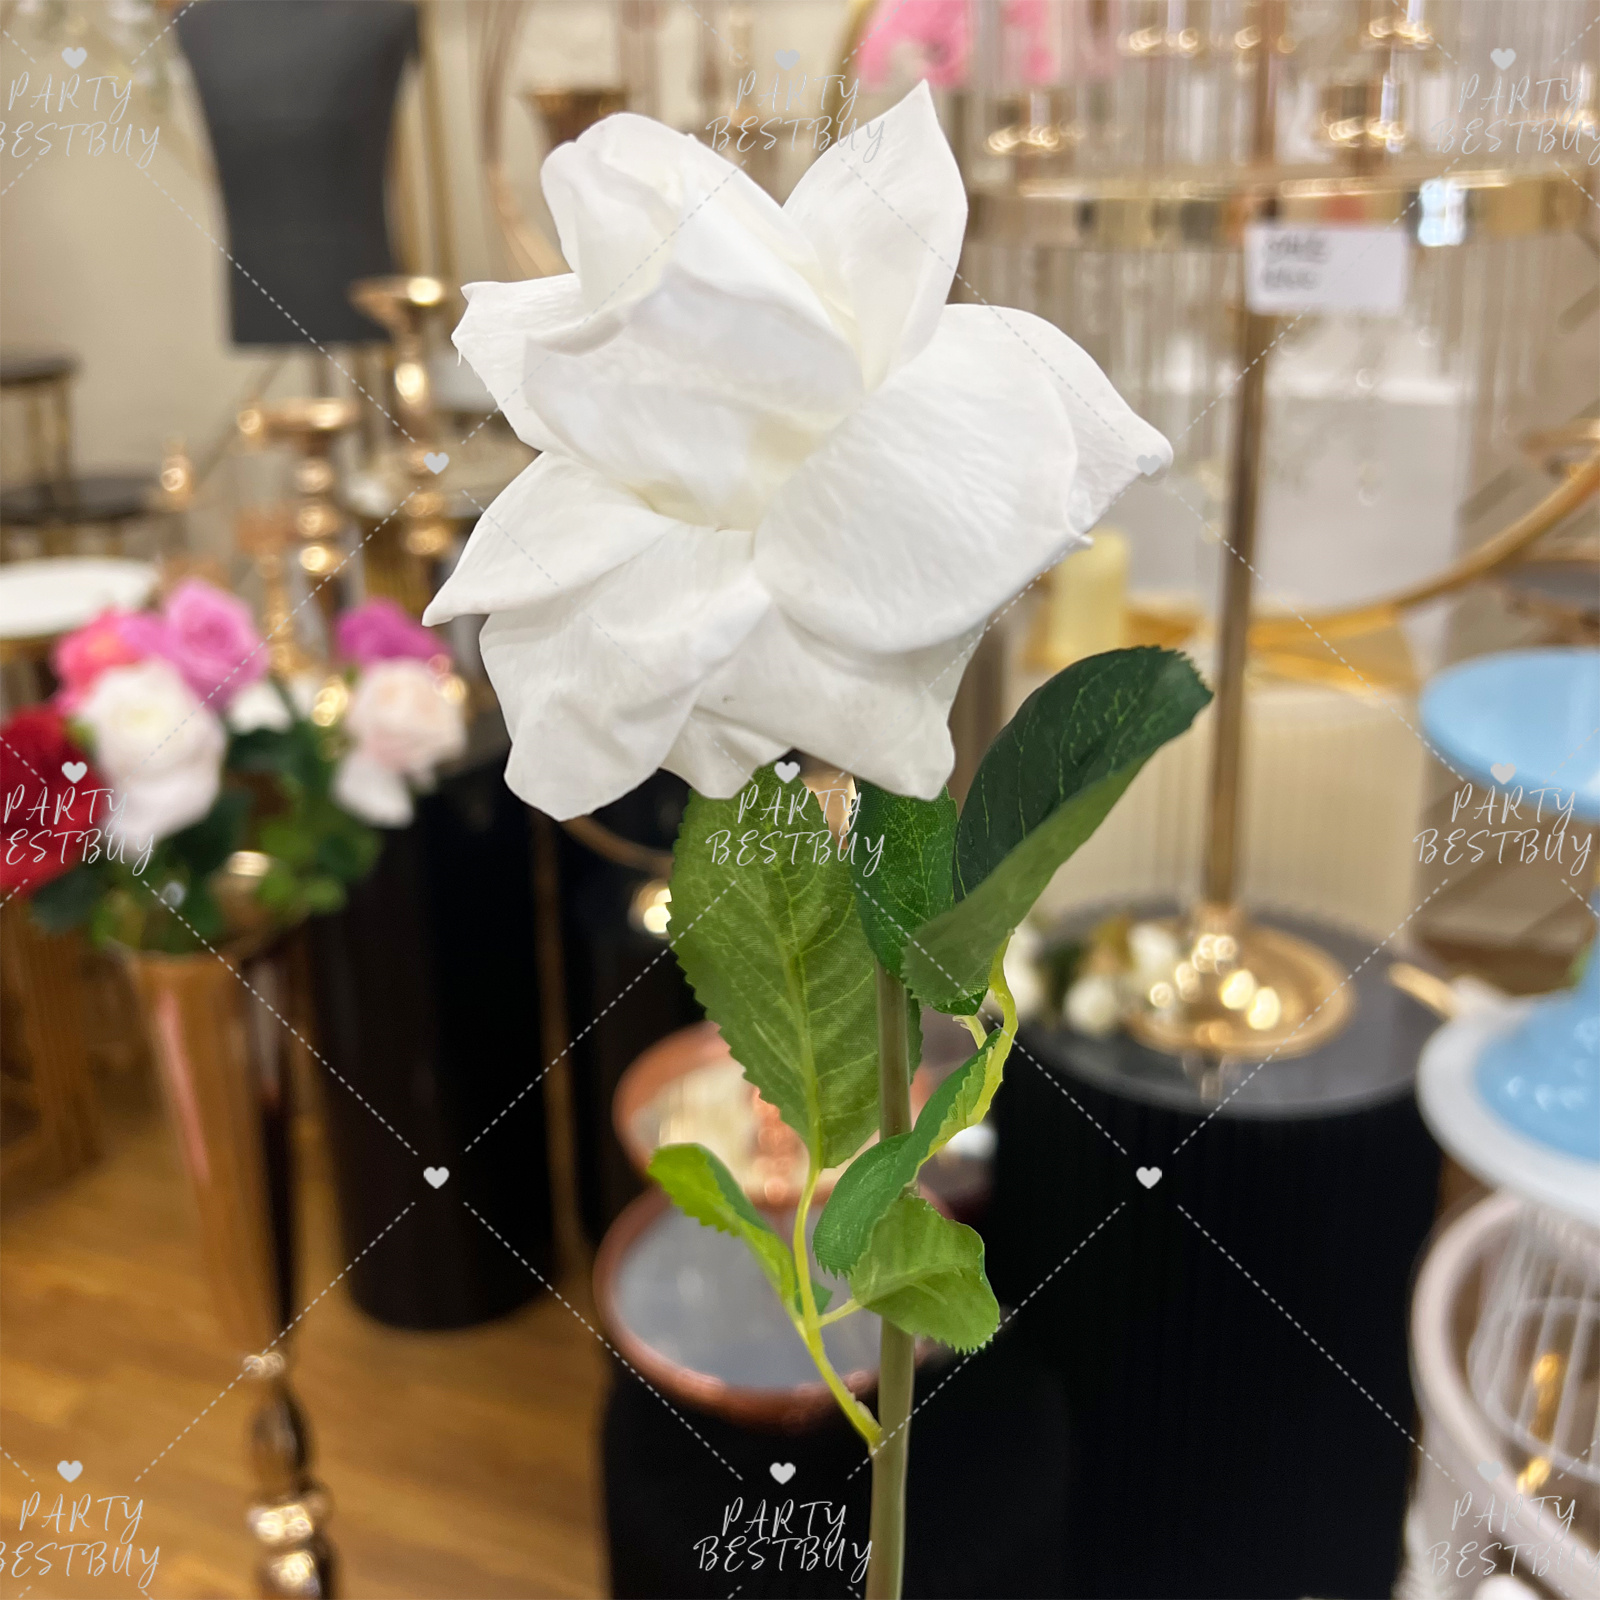 10x Latex Real touch flowers Rose Artificial Fake Flowers Bouquet Wedding  Party Shop - Party Bestbuy Online Store